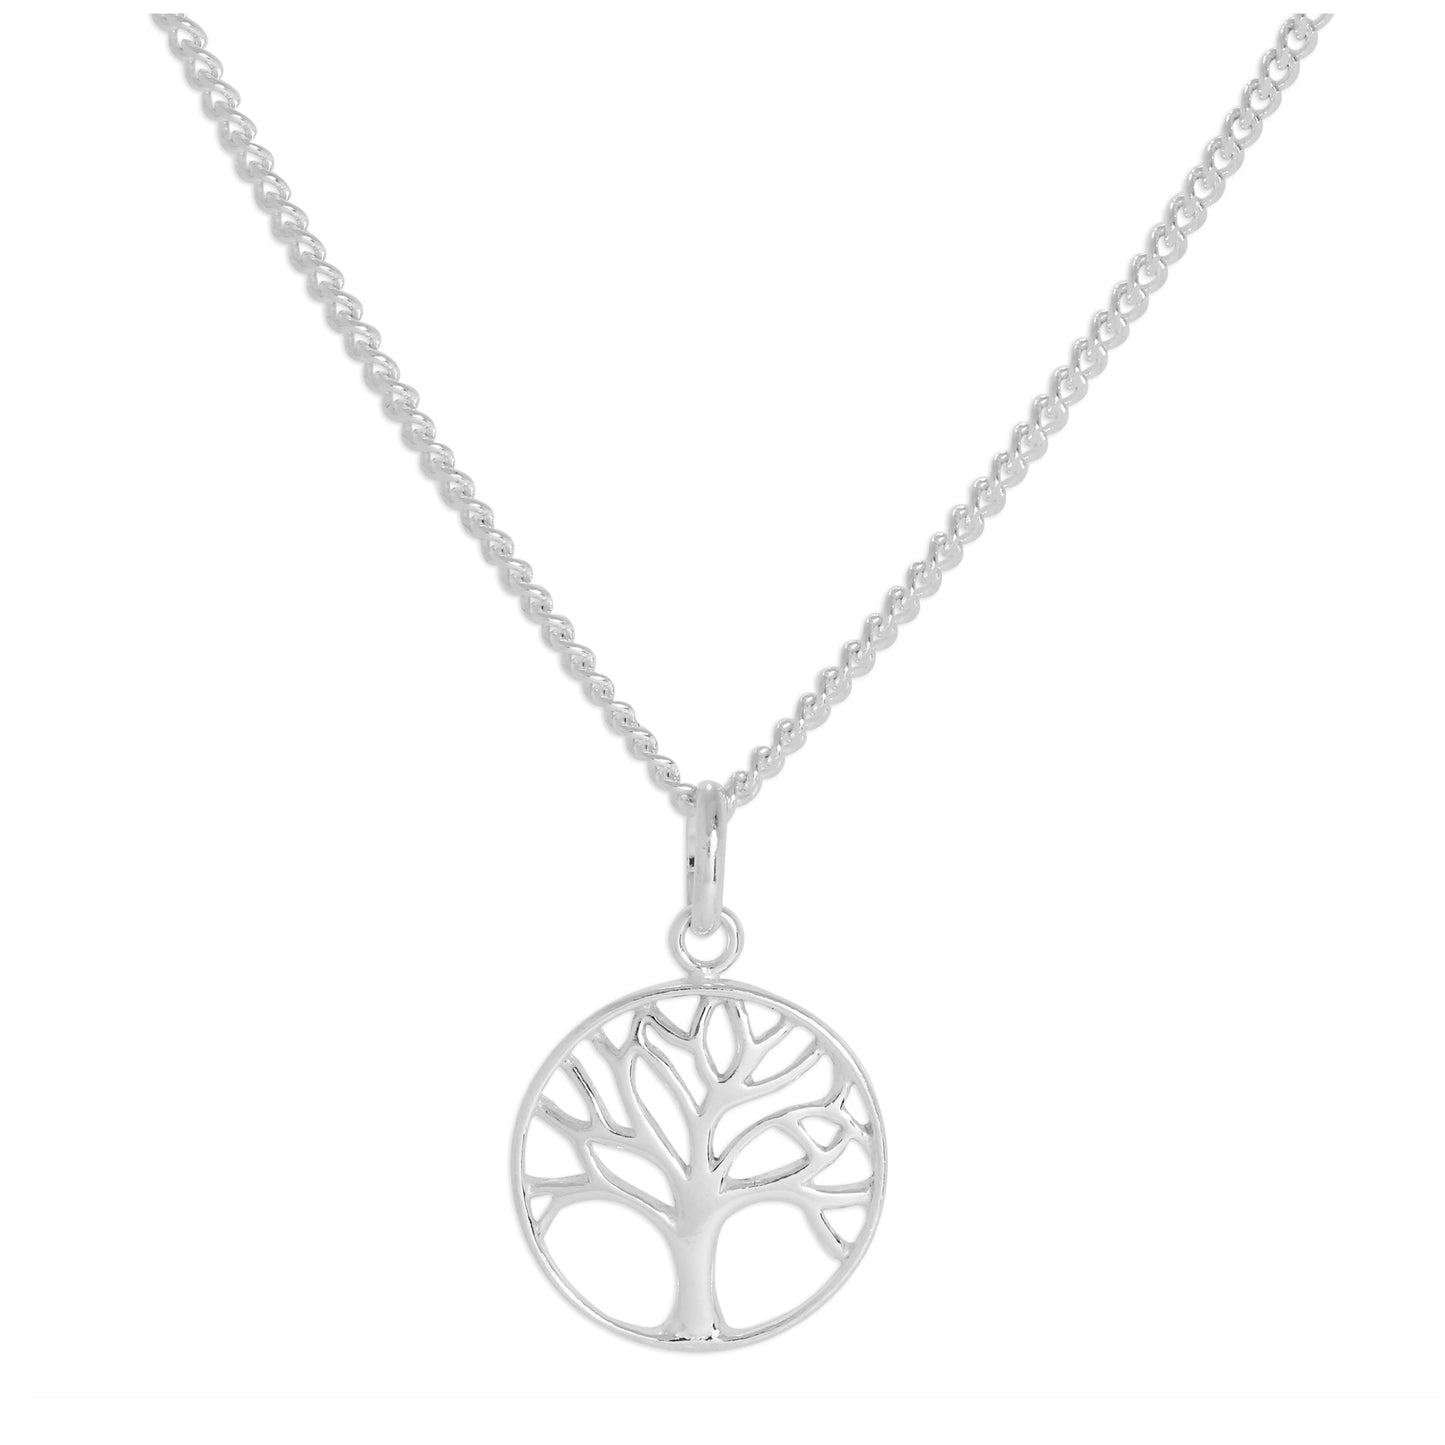 Sterling Silver Tree of Life Necklace 16 - 24 Inches